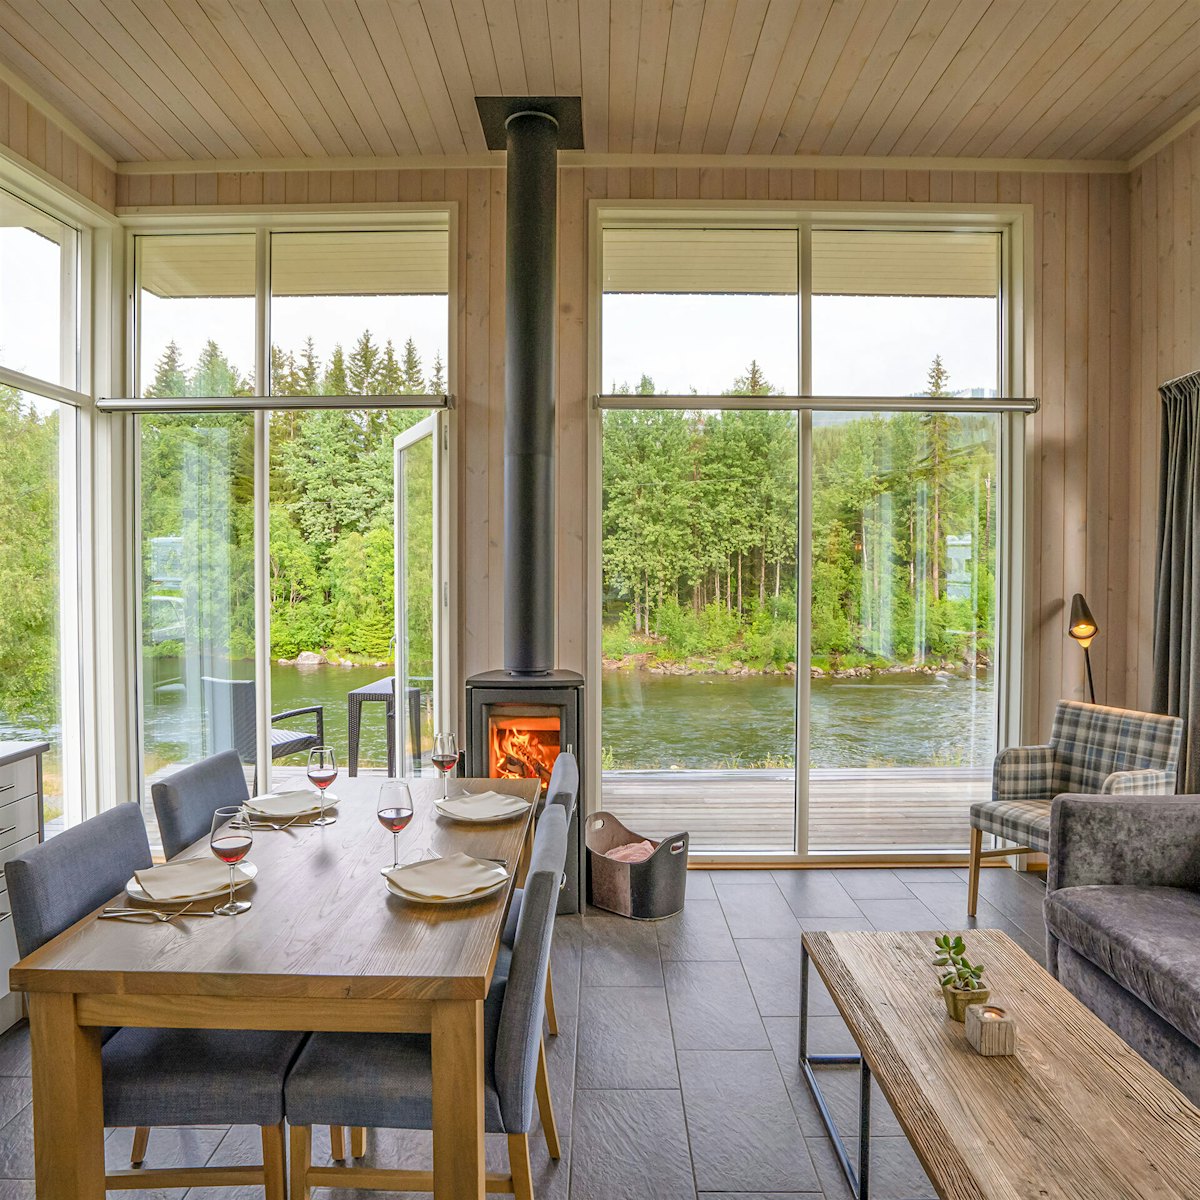 Bright living room with floor-to-ceiling windows, dining table, sofa and fireplace. View of green trees and river. Photo